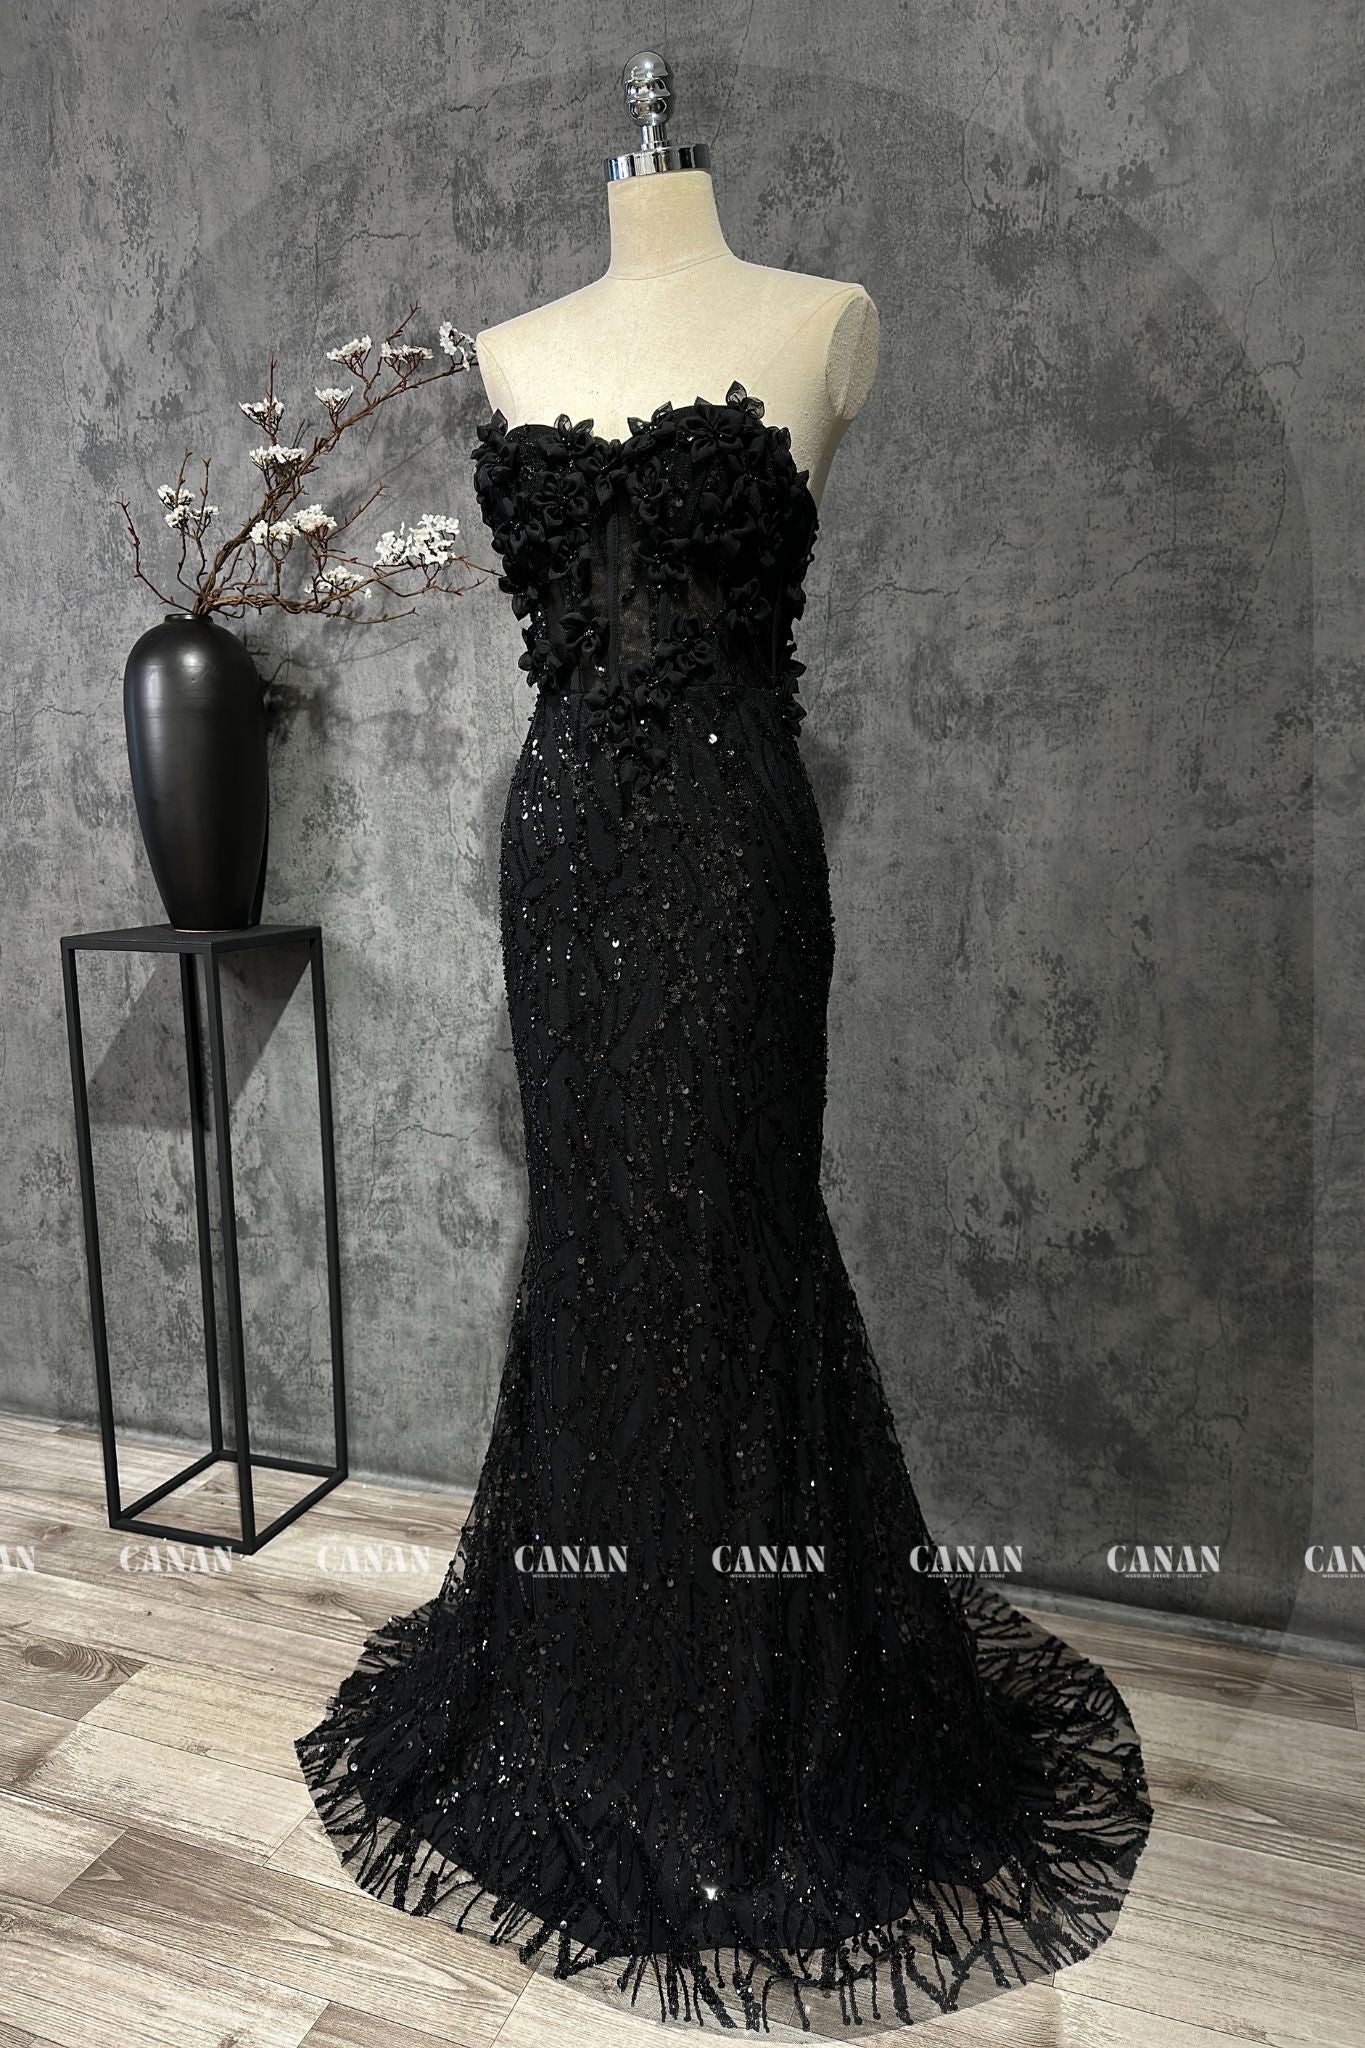 Elegant Black Sleeveless Corset Evening Dress: Sparkling Gown for Special Occasions